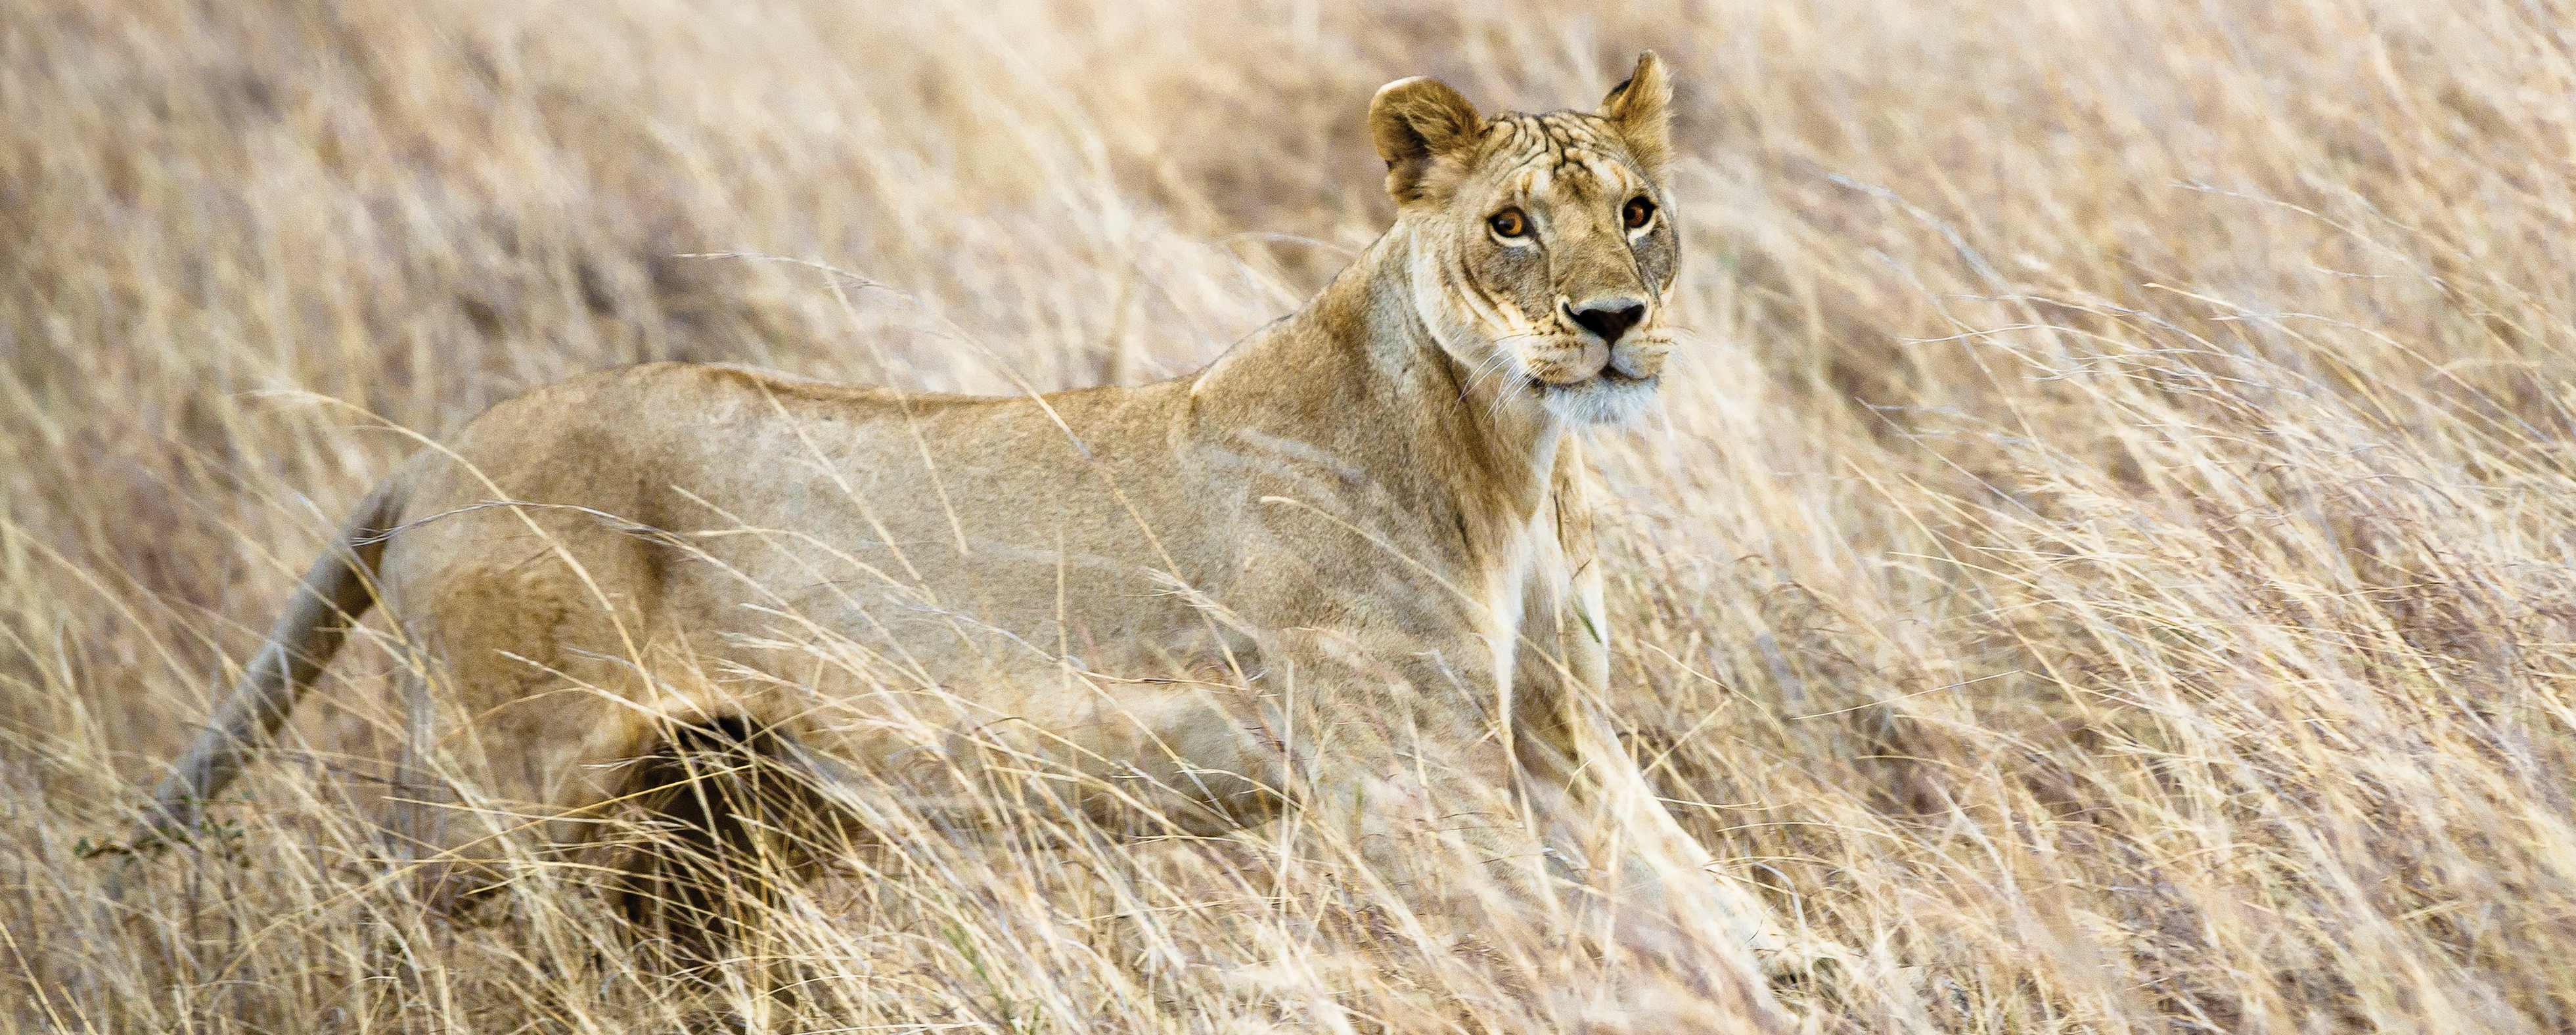 A light-brown female lion in tall light-brown grass; her body is in motion, but her face is sharp and clear as she looks directly at the camera.